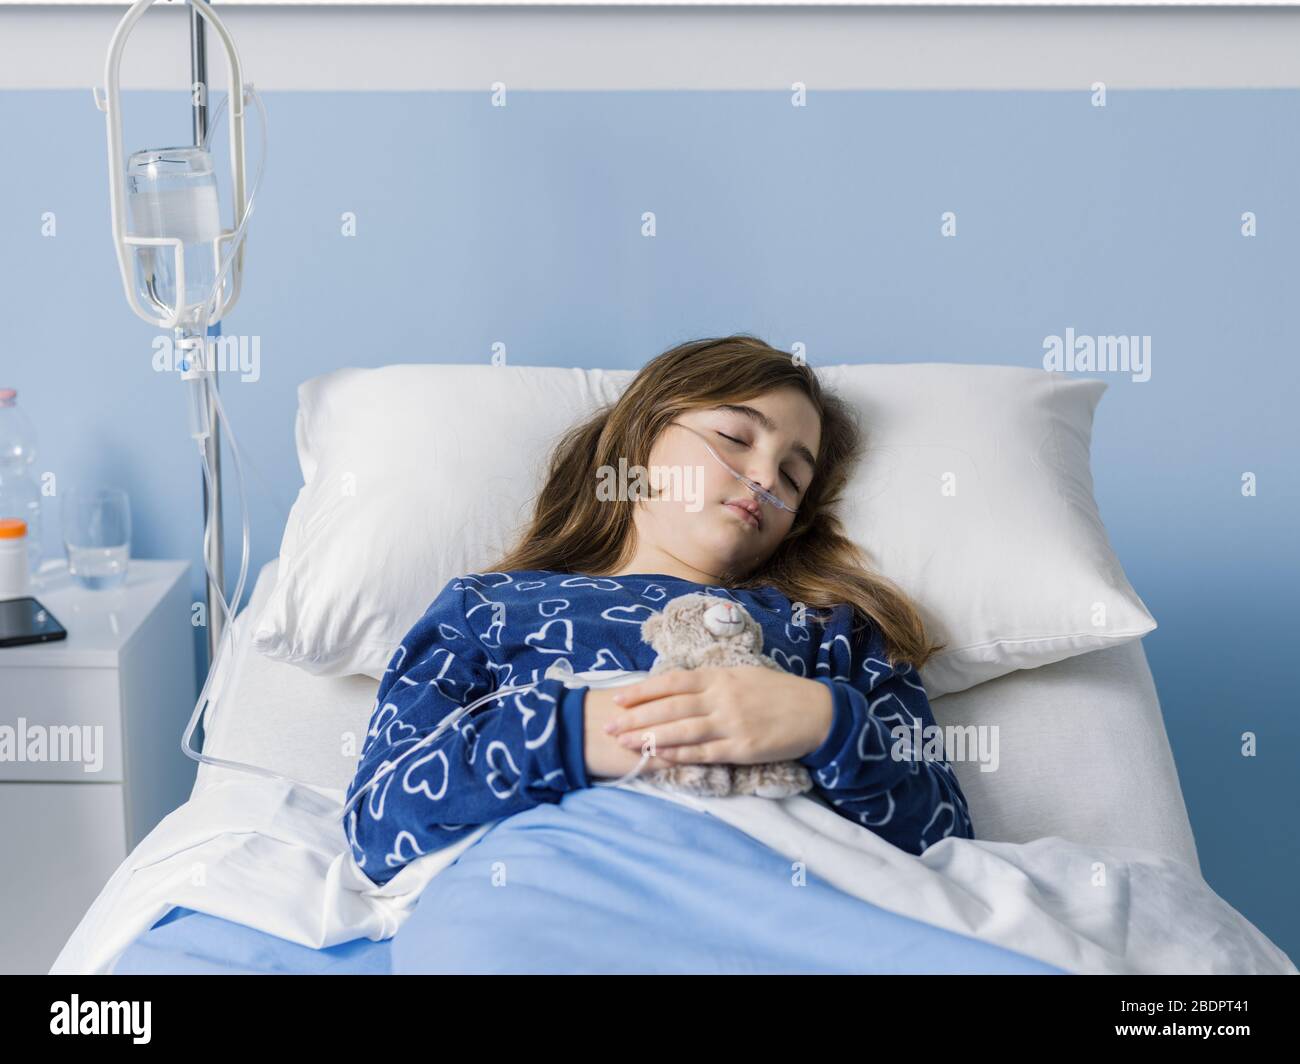 Sick child lying in a hospital bed and holding her teddy bear, kids and healthcare concept Stock Photo